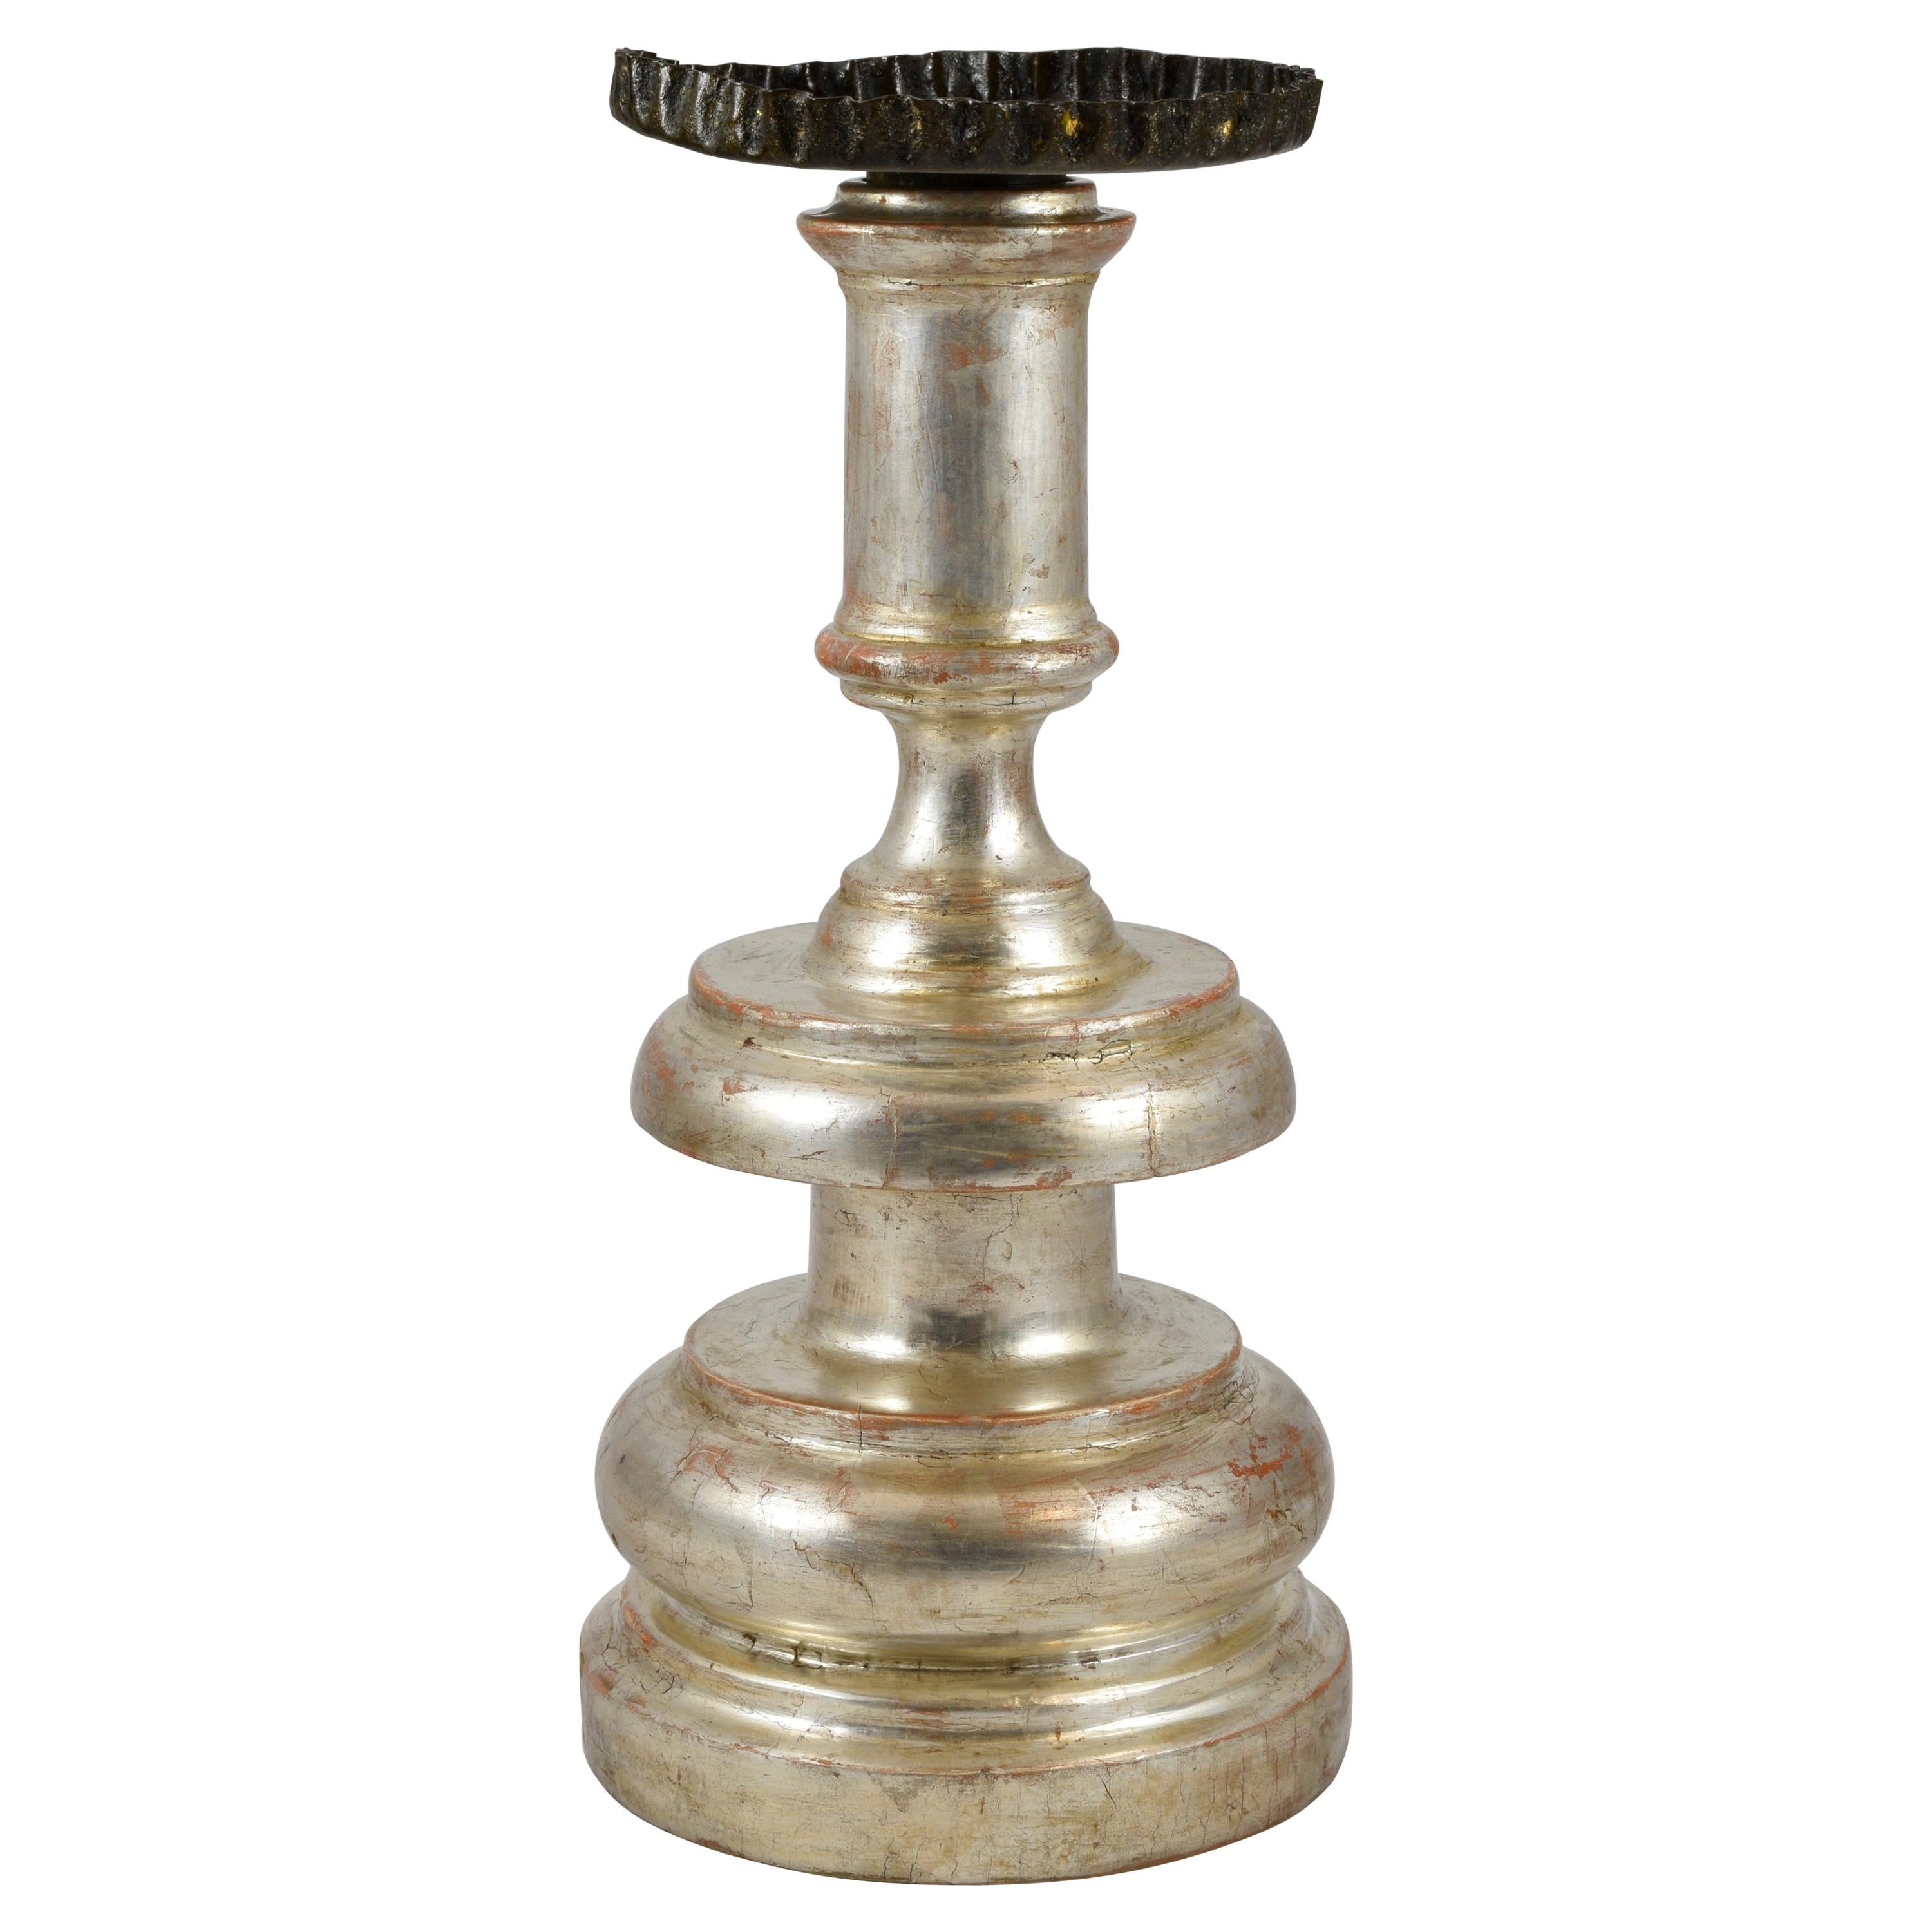 Florentine Candlestick in Lathed and Silvered Wood, Late 17th Century For Sale